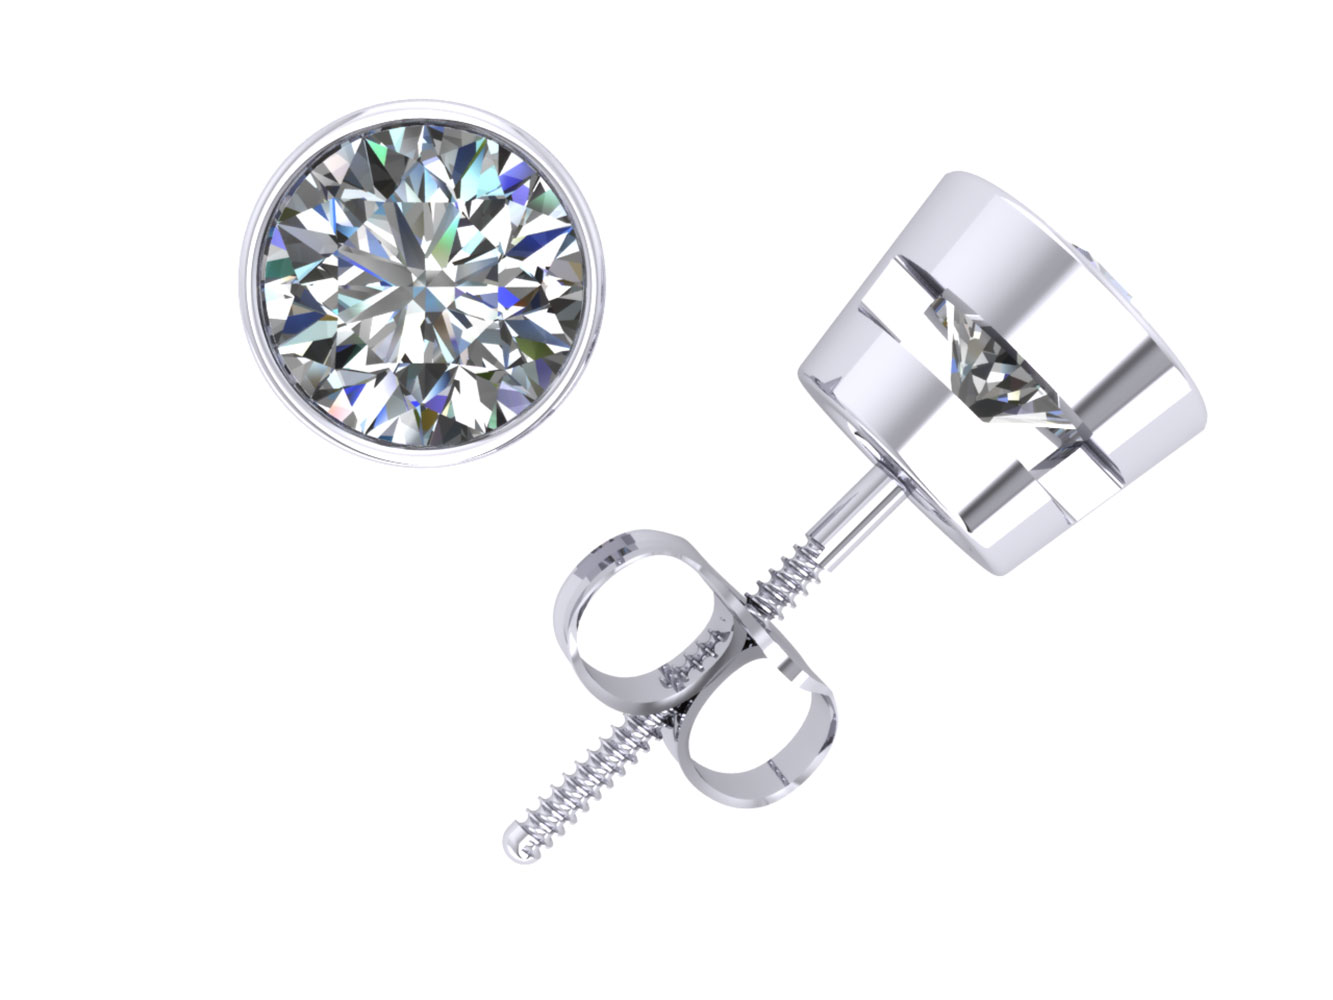 Jewel We Sell 1.25CT Round Cut Diamond Solitaire Stud Earrings 14k White or Yellow Gold Bezel Screwback E VS1